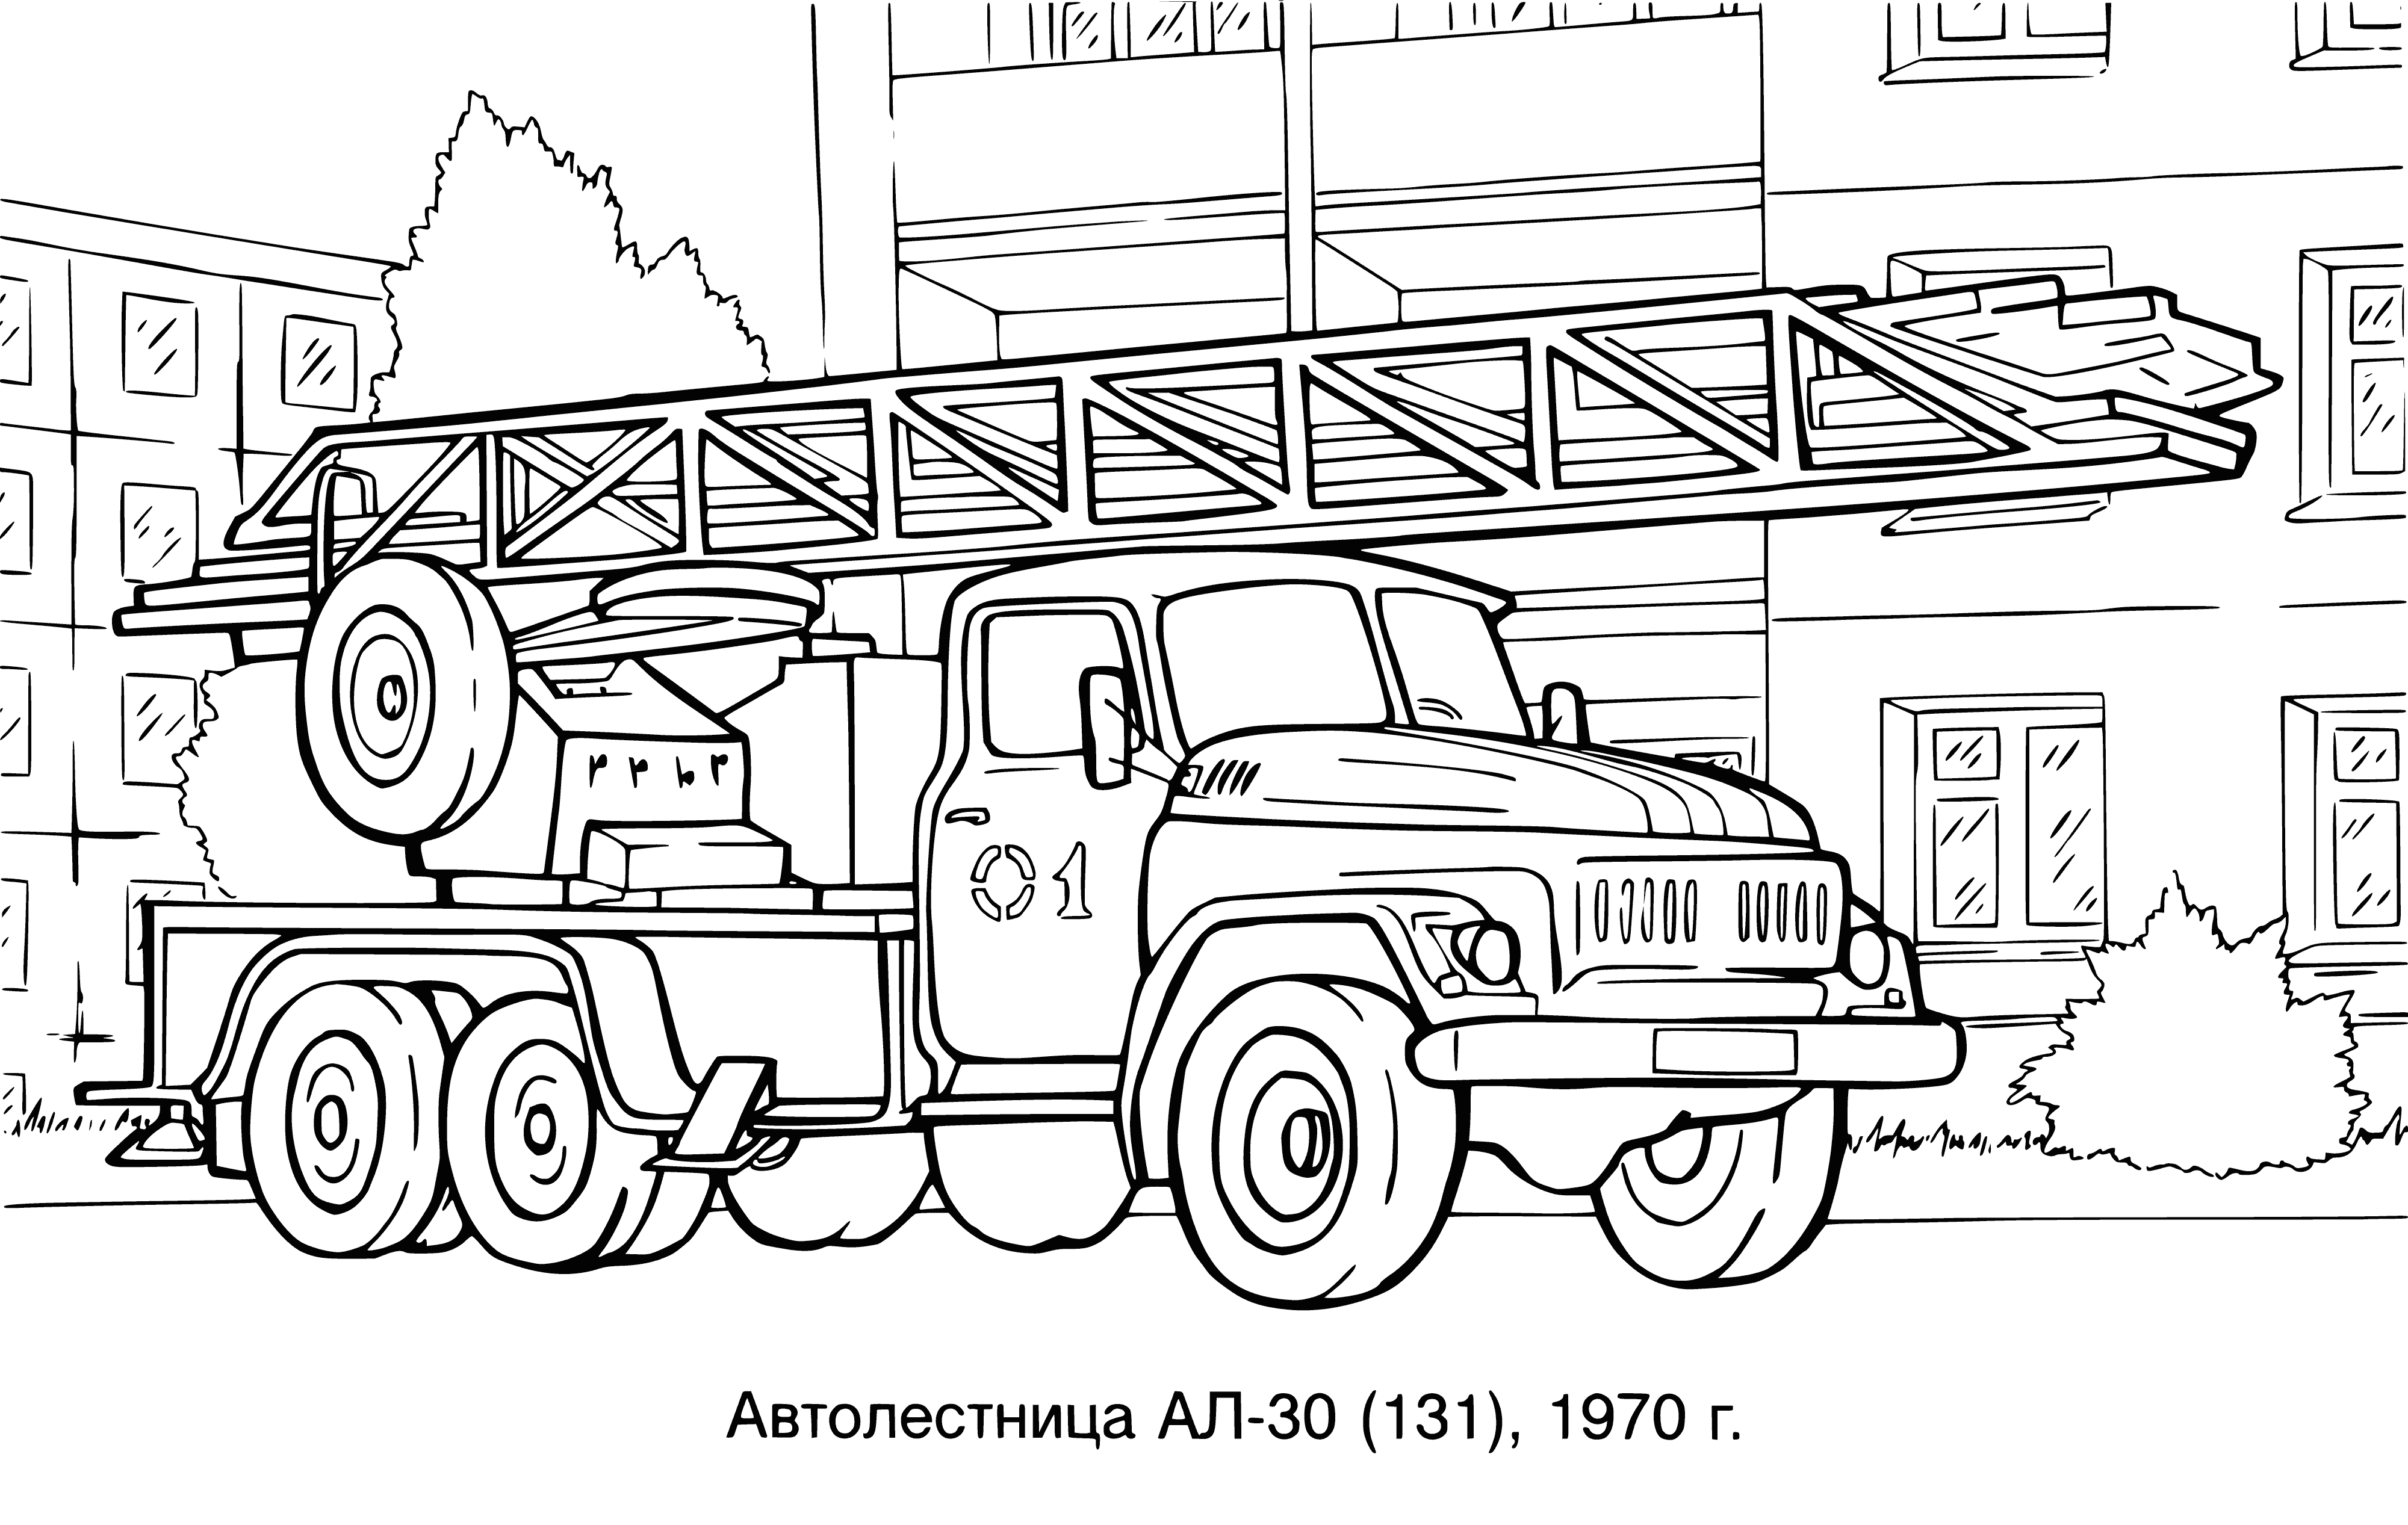 coloring page: Firefighters & police in red & white uniforms on motorway, fire truck & police car in background. #emergency